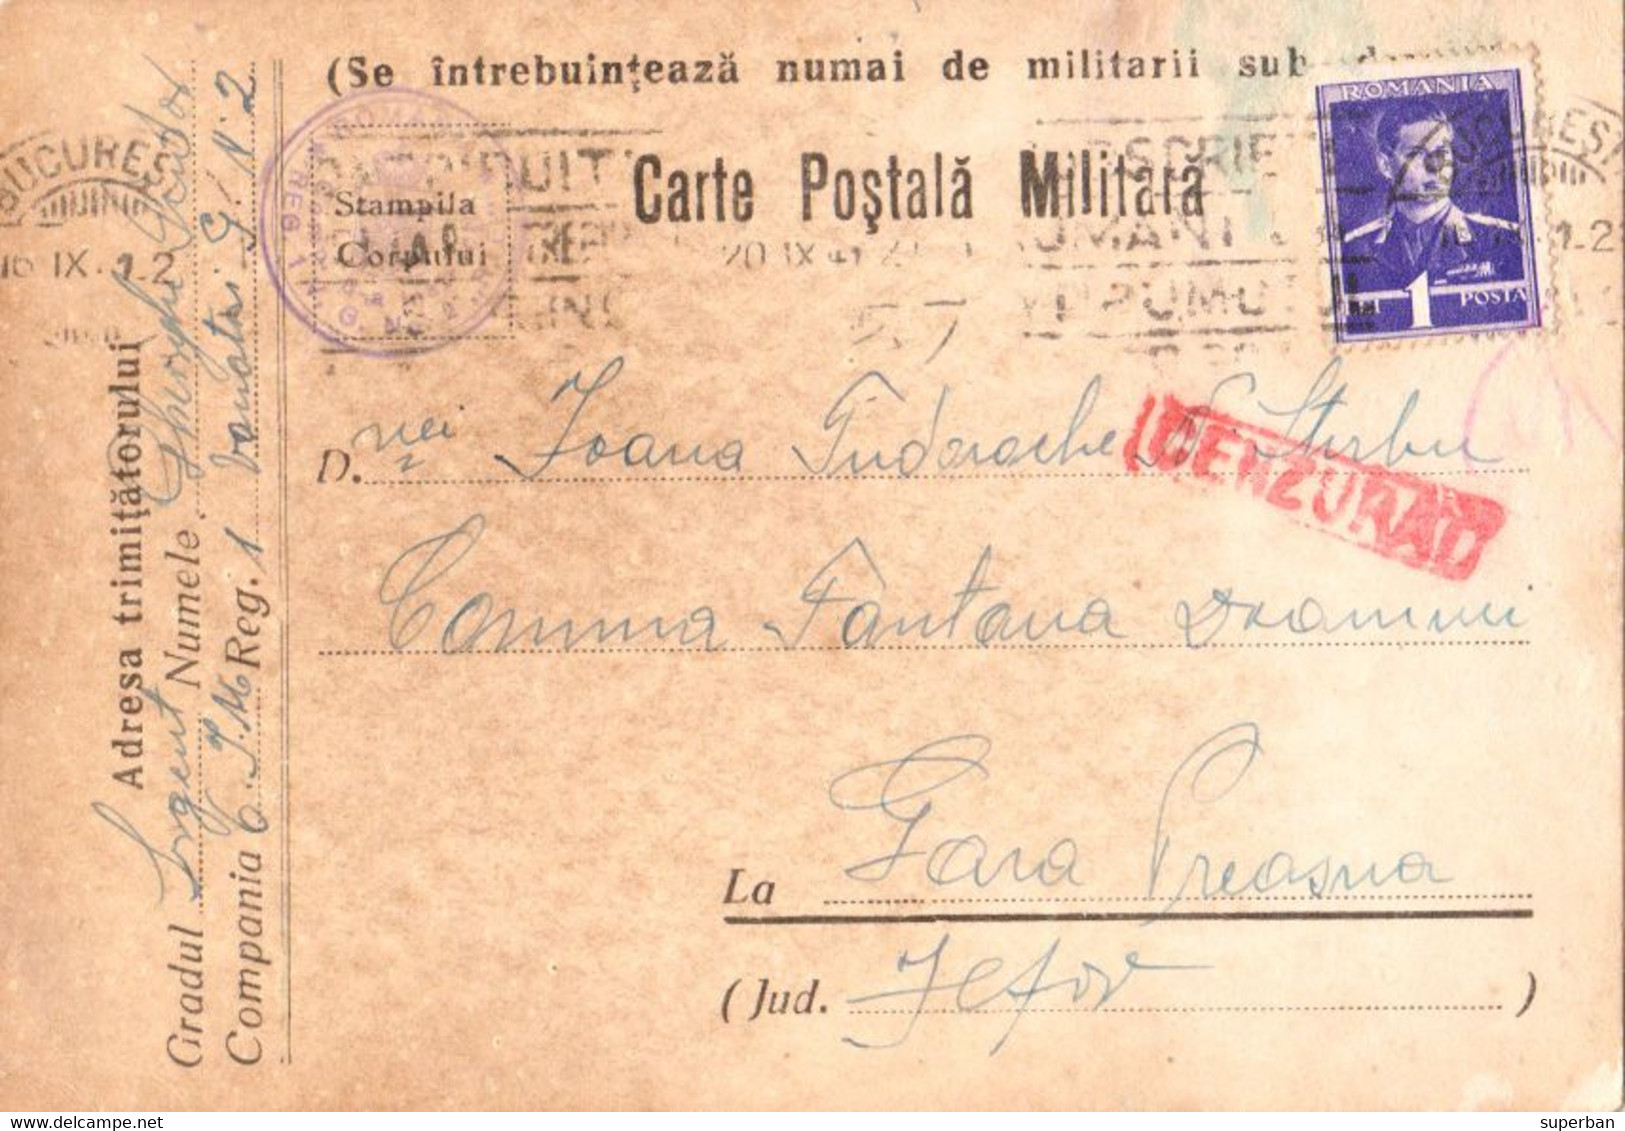 ROMANIA - WW II : MILITARY POSTCARD MAILED In SEPTEMBER 1941 From THE BATTLEFIELD By ROMANIAN MILITARY POST (ak646) - 2. Weltkrieg (Briefe)